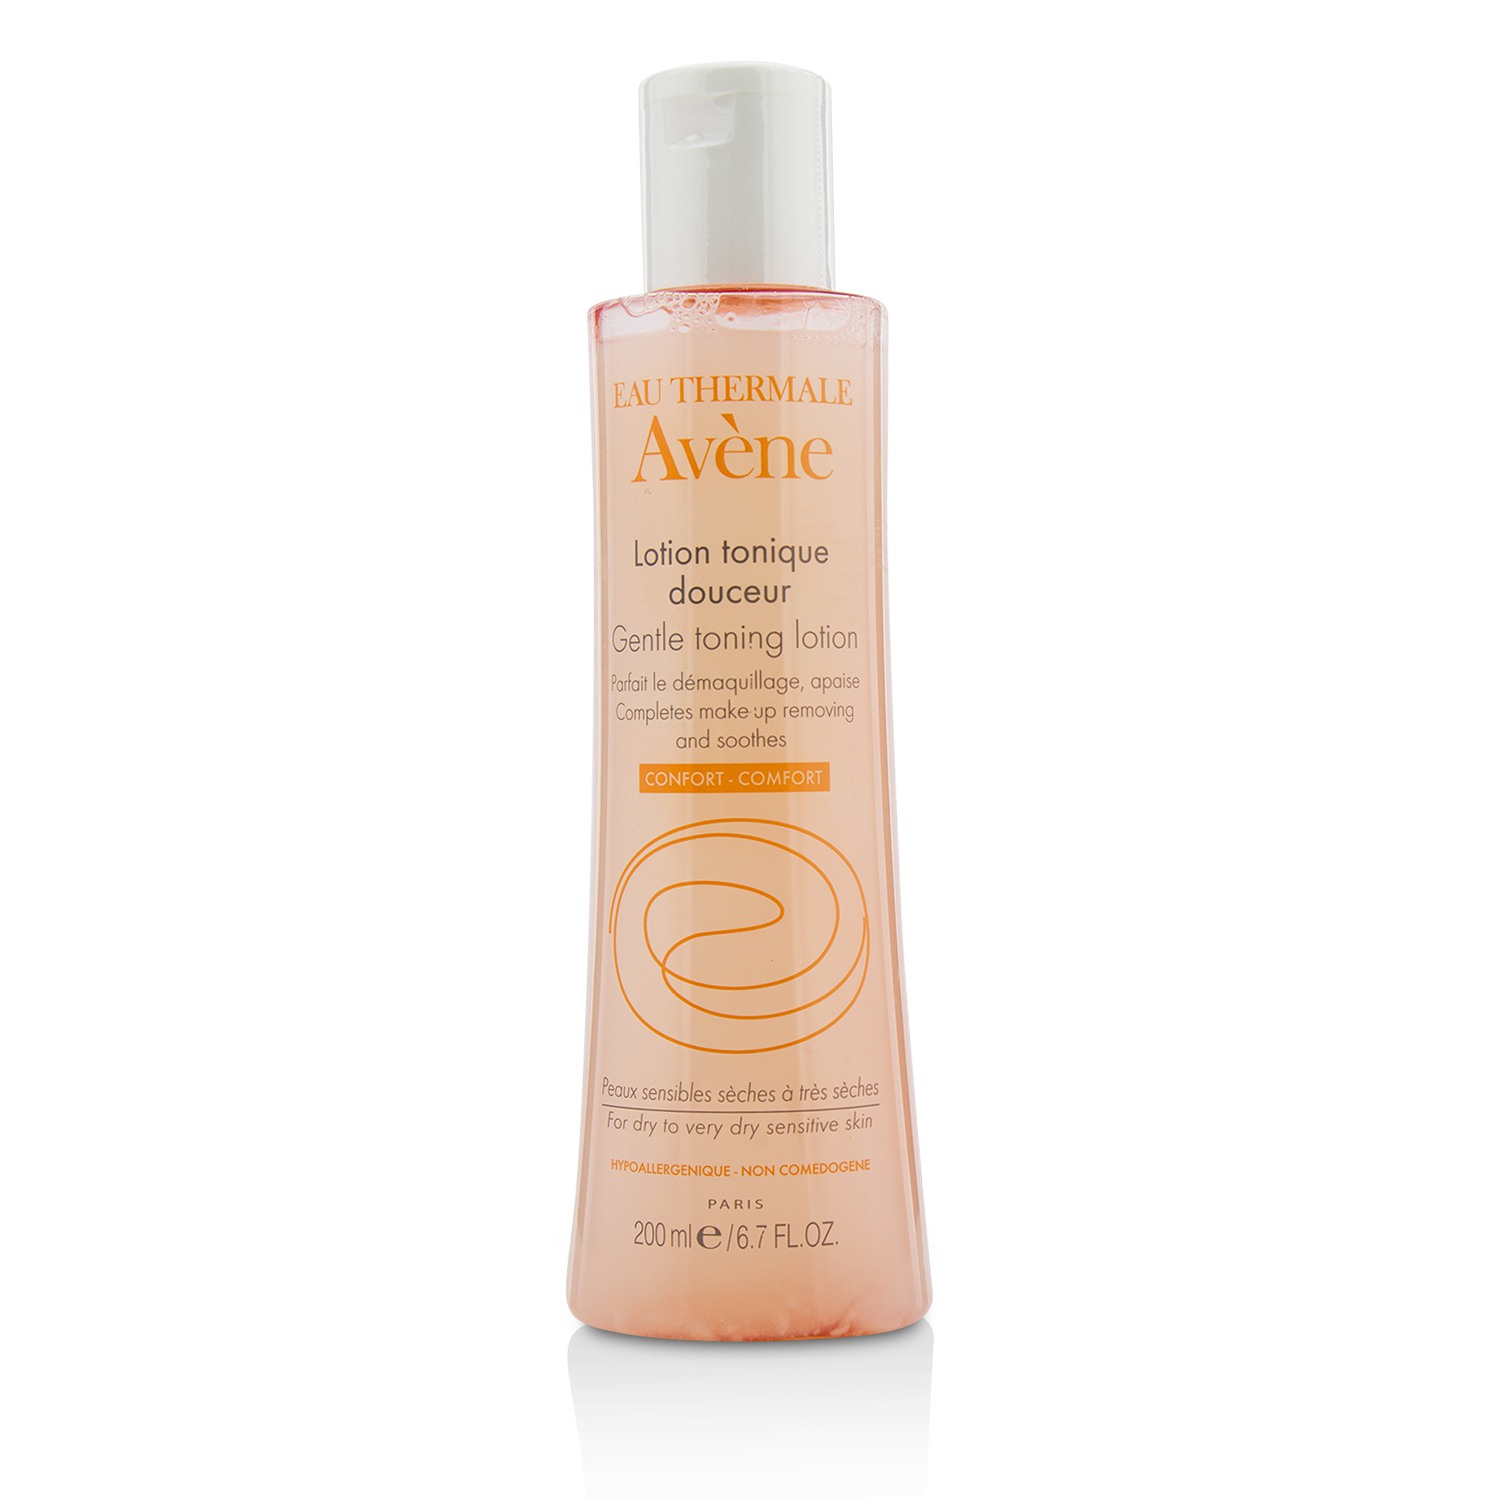 Gentle Toning Lotion - For Dry to Very Dry Sensitive Skin Avene Image